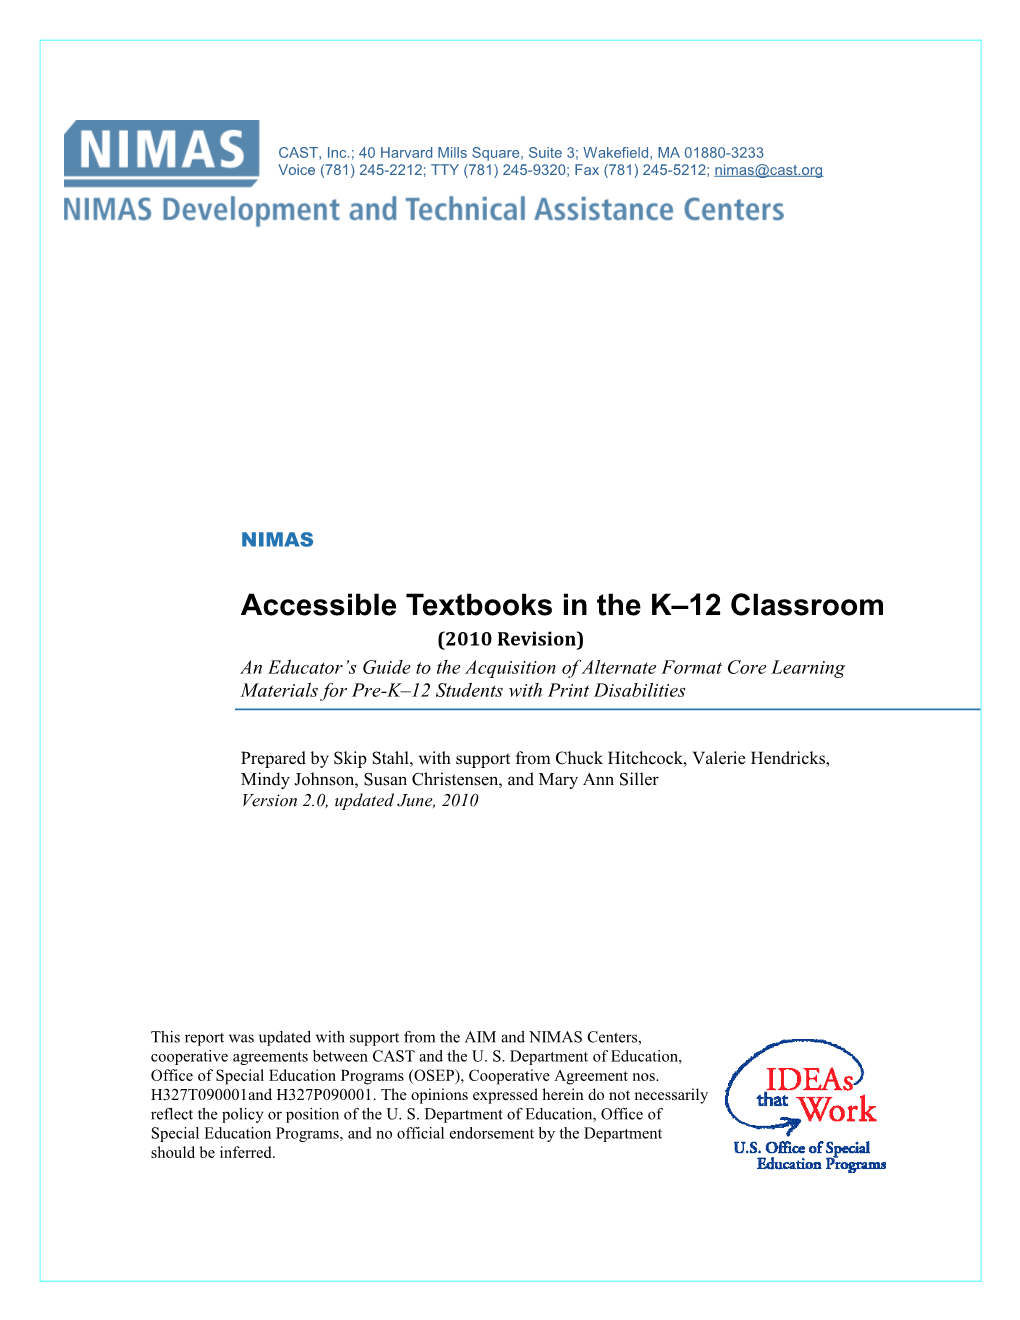 Accessible Textbooks in the Classroom